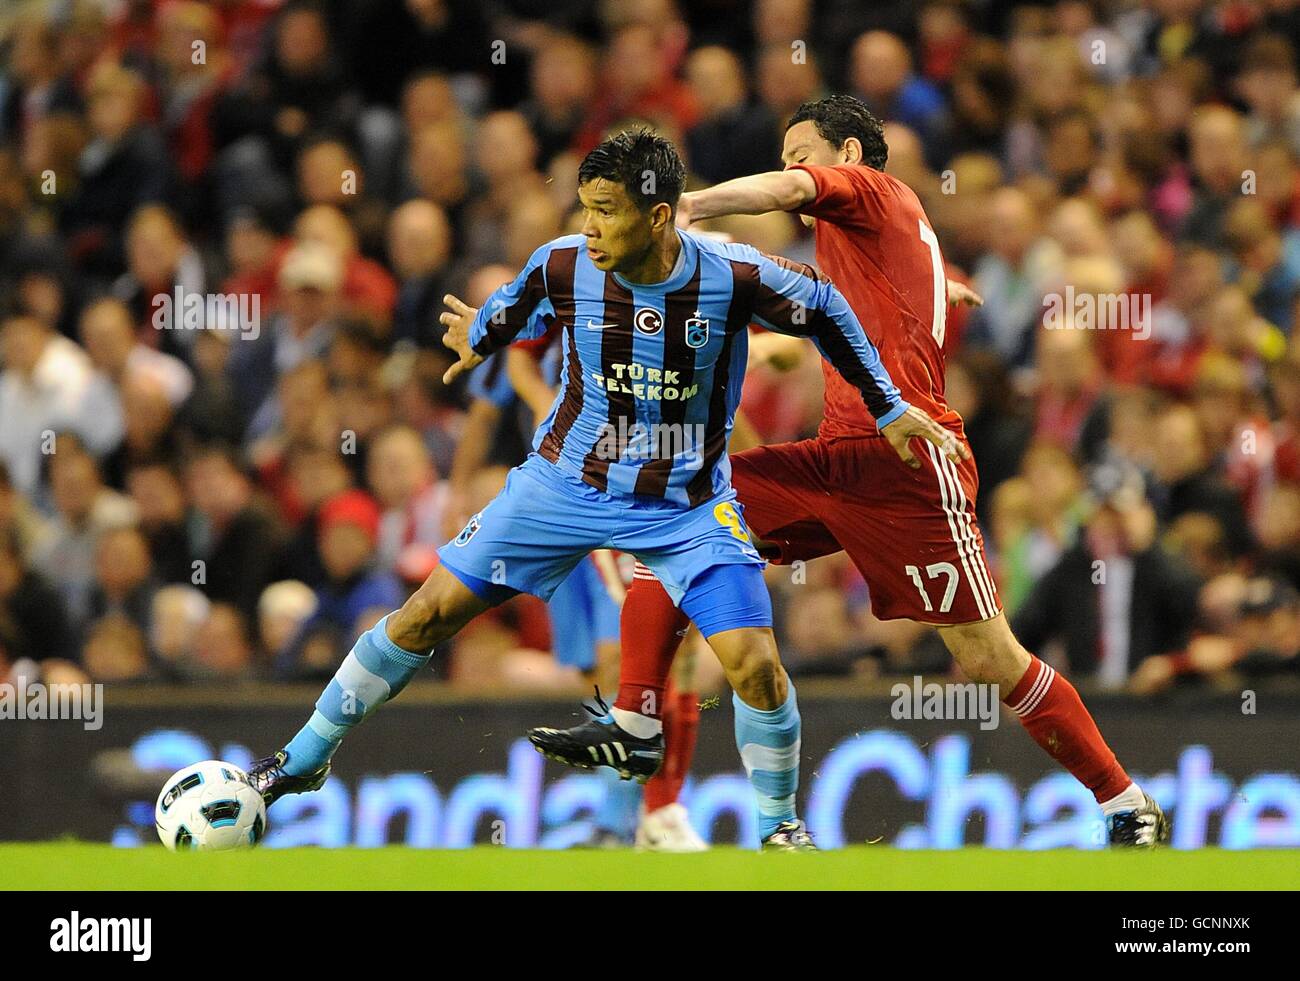 Soccer - UEFA Europa League Final Qualifying Round - First Leg - Liverpool v Trabzobspor - Anfield. Liverpool's Rodriguez Maxi (right) and Trabzonspor's Teofilo Gutierrez (left) battle for the ball Stock Photo